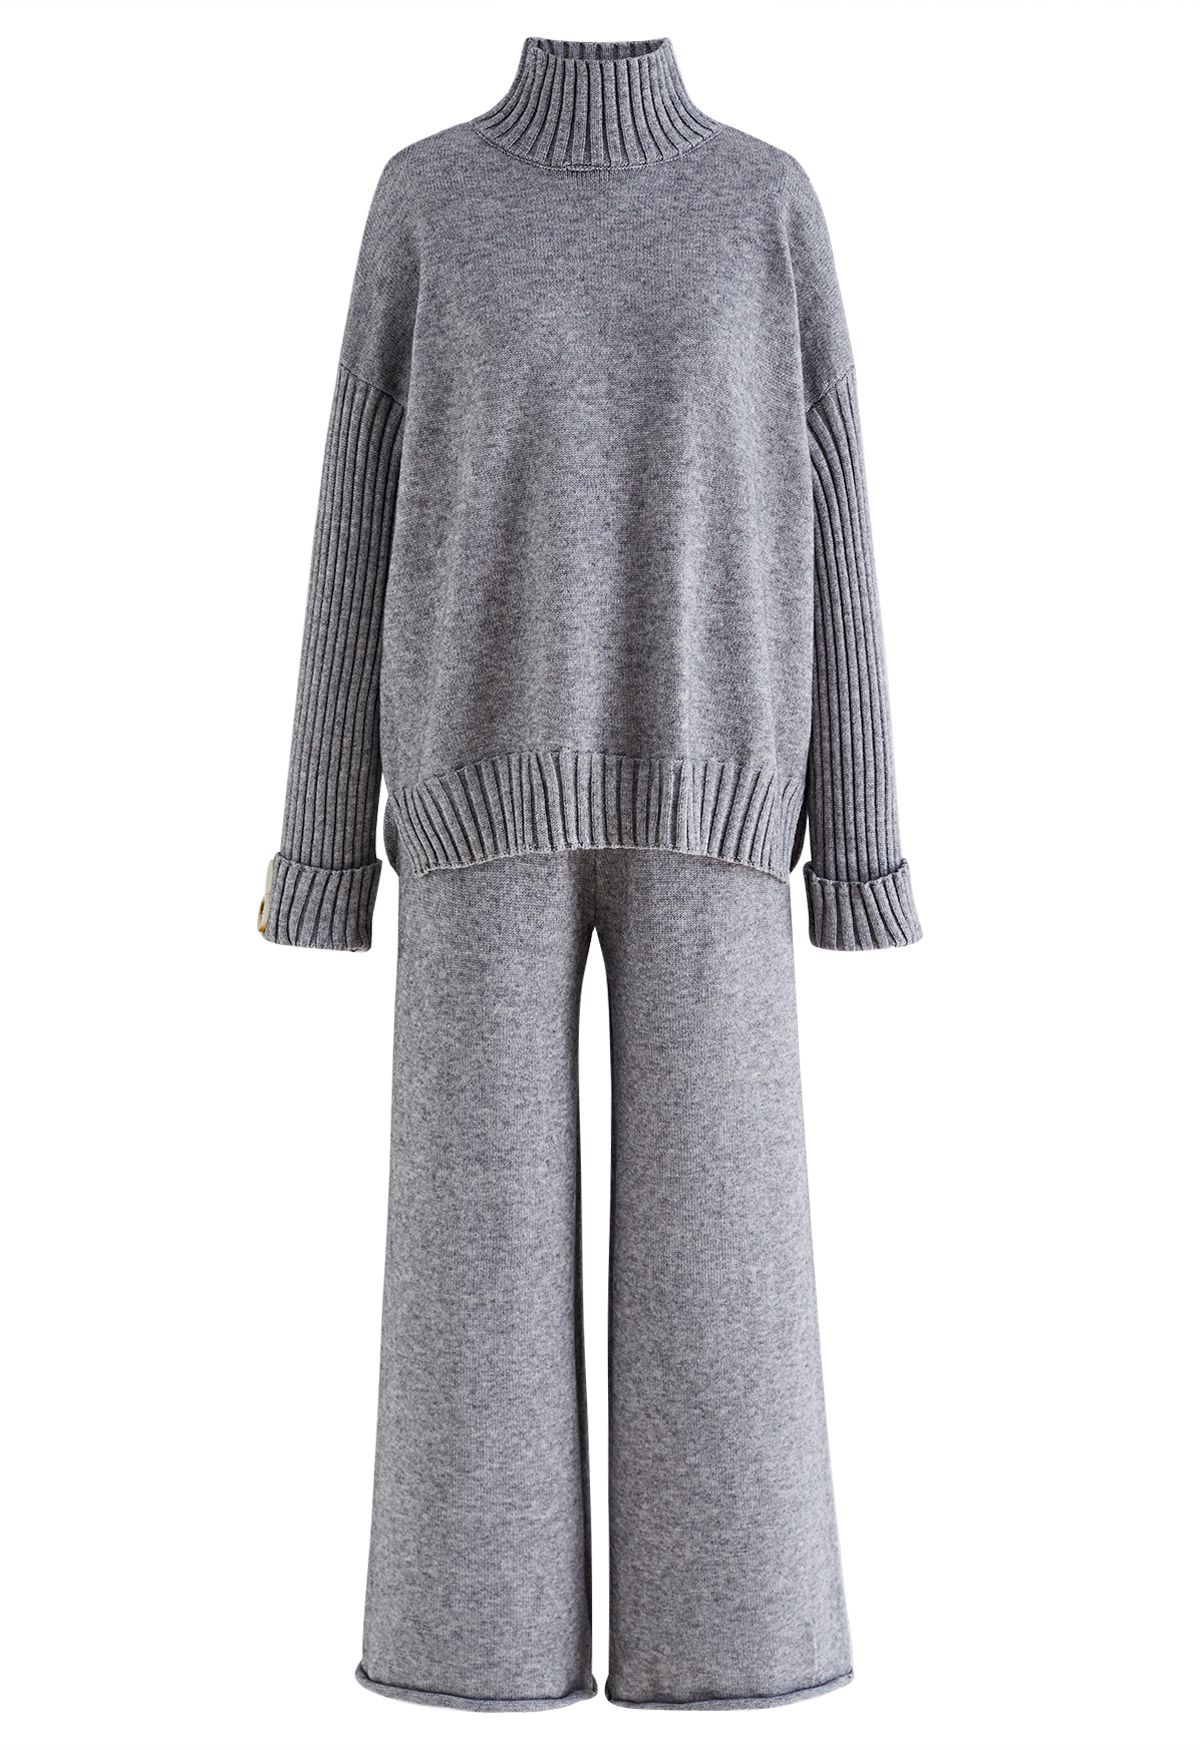 High Neck Buttoned Cuff Sweater and Knit Pants Set in Grey - Retro